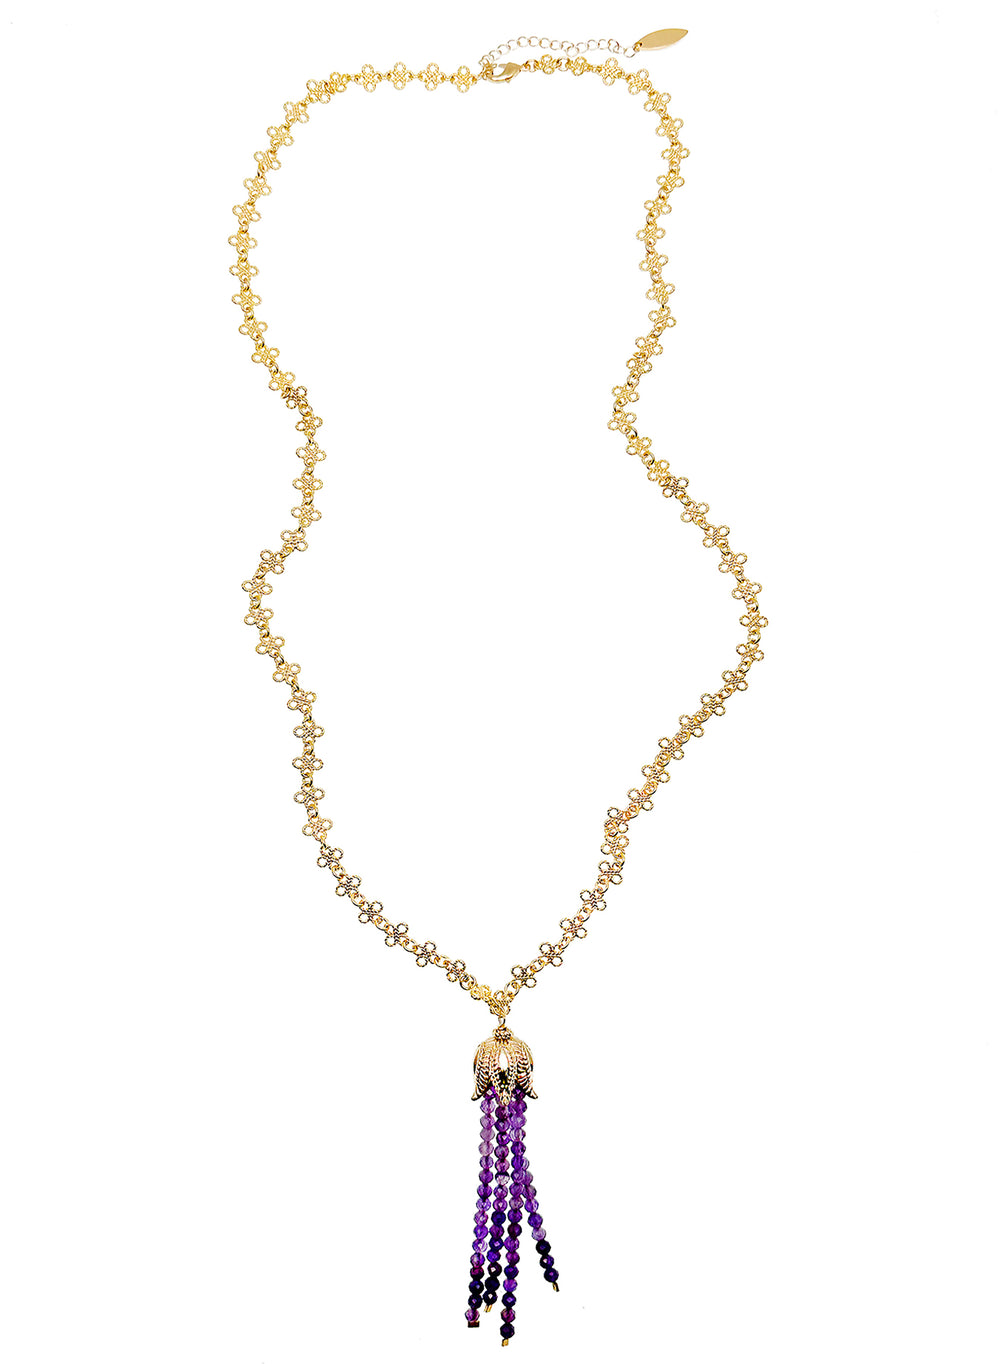 Gold Chain with Amethyst Tassel Necklace JN036 - FARRA